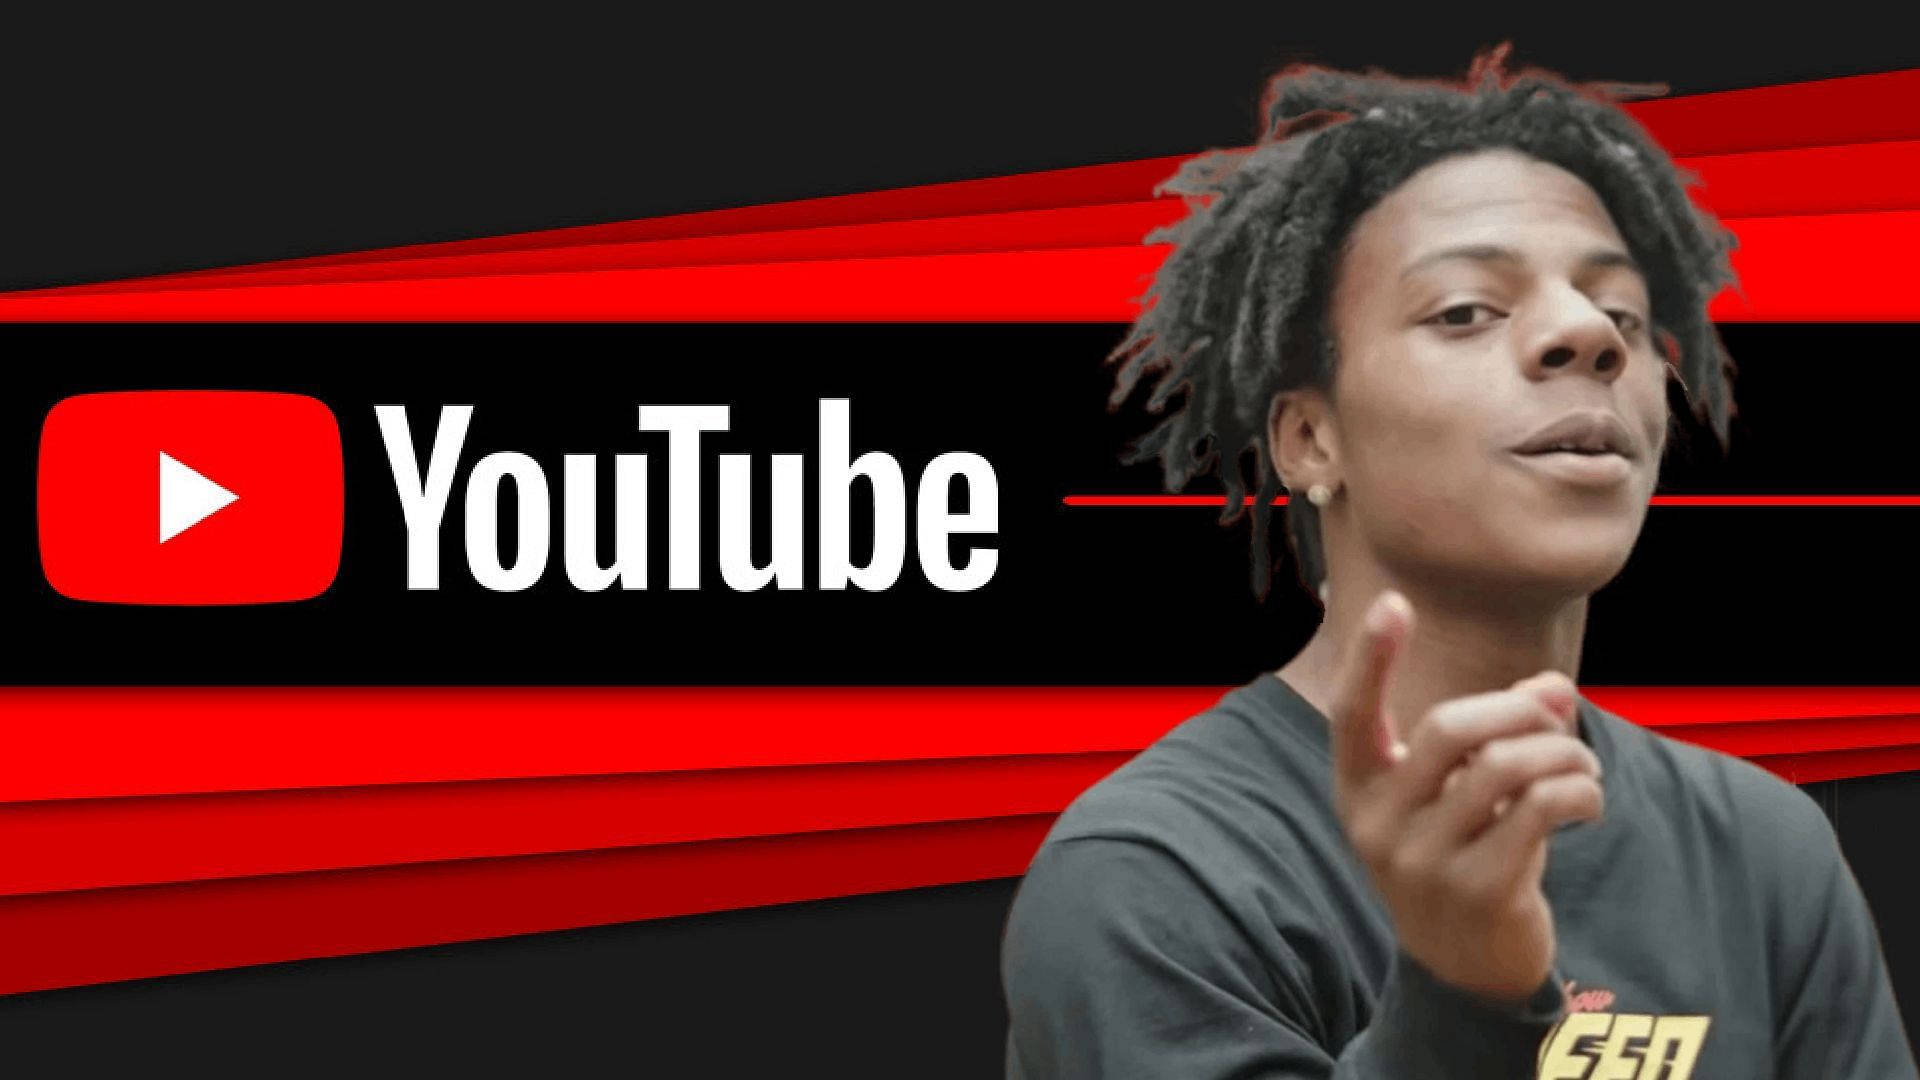 A Man With Dreadlocks Is Pointing At Youtube